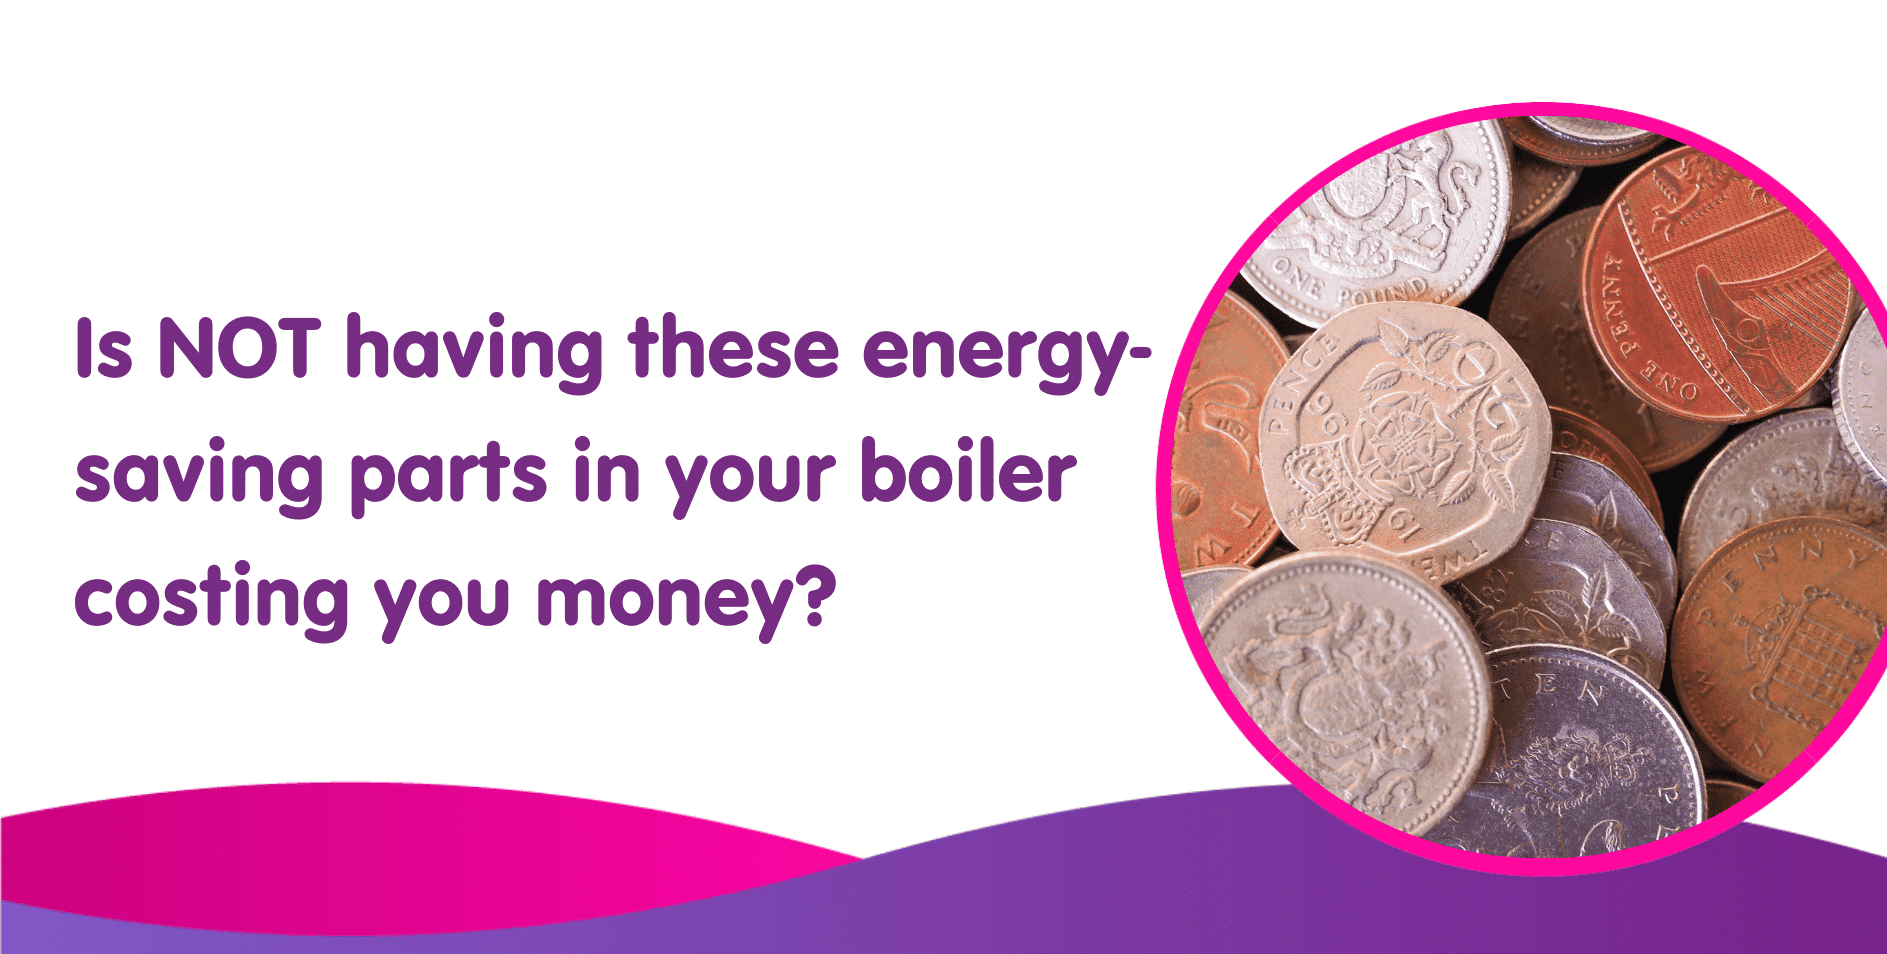 Is NOT having these energy saving parts in your boiler costing you money?